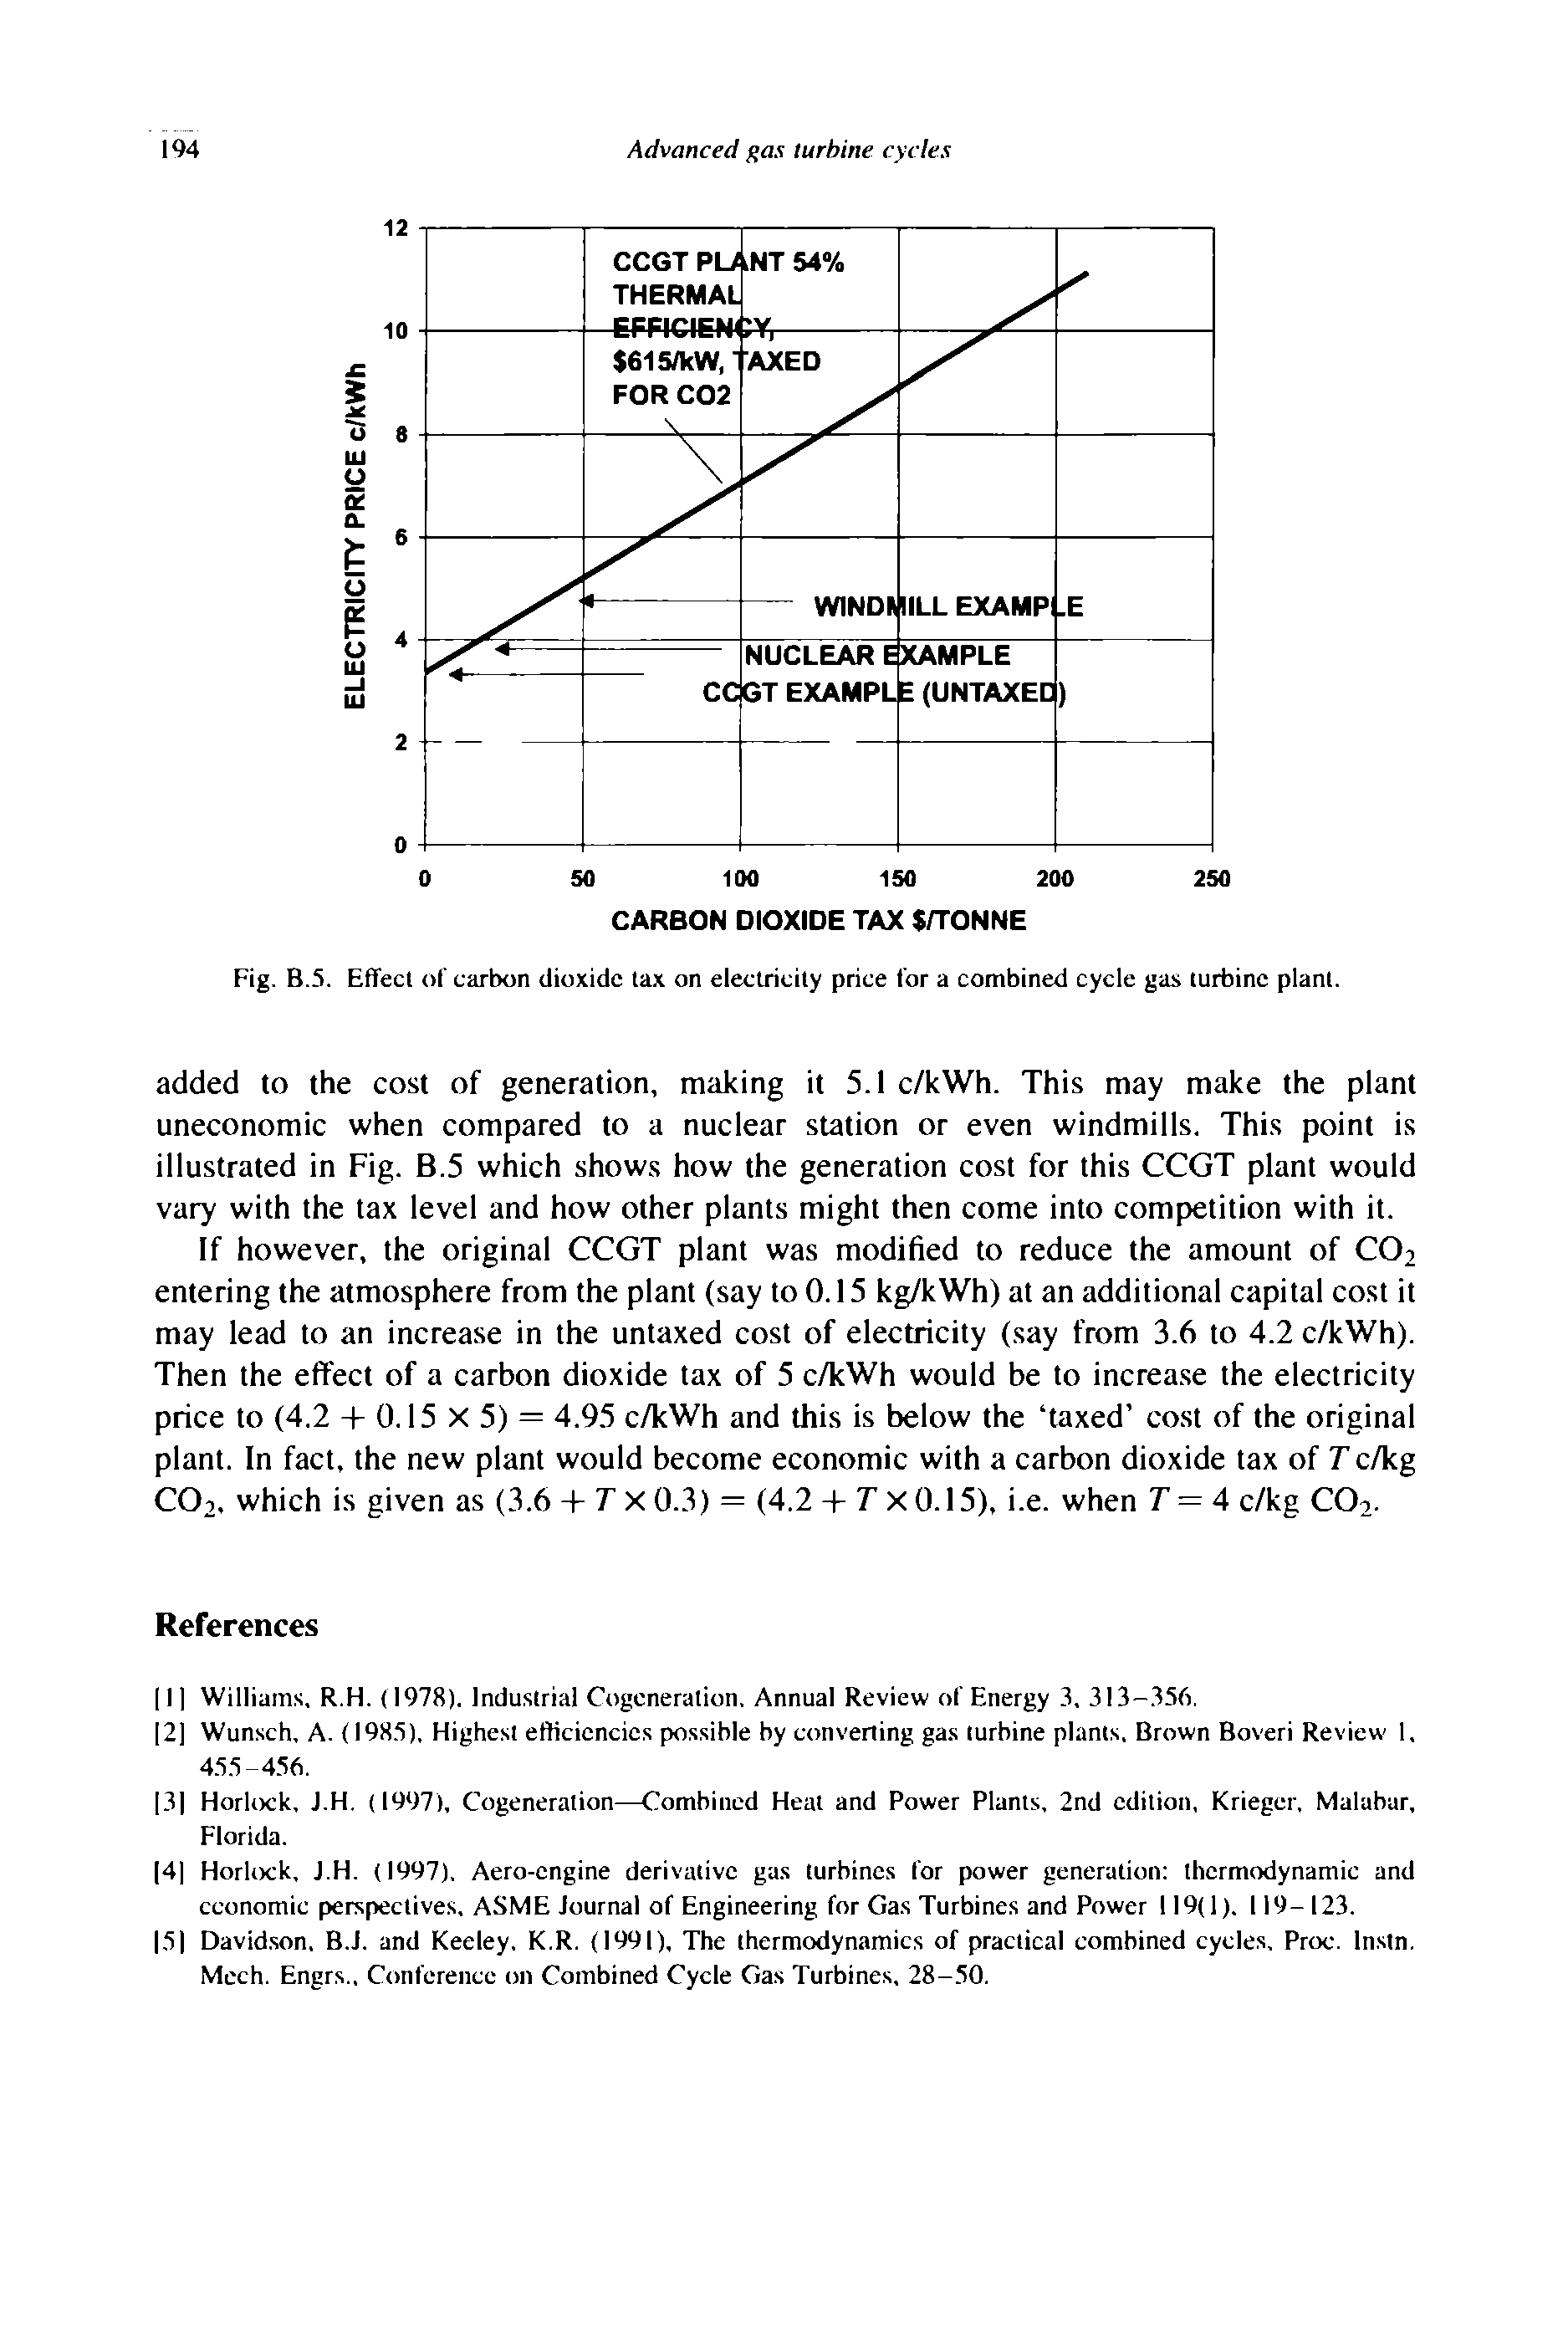 Fig. B.5. Effect of carbon dioxide lax on electricity price for a combined cycle gas turbine plant.